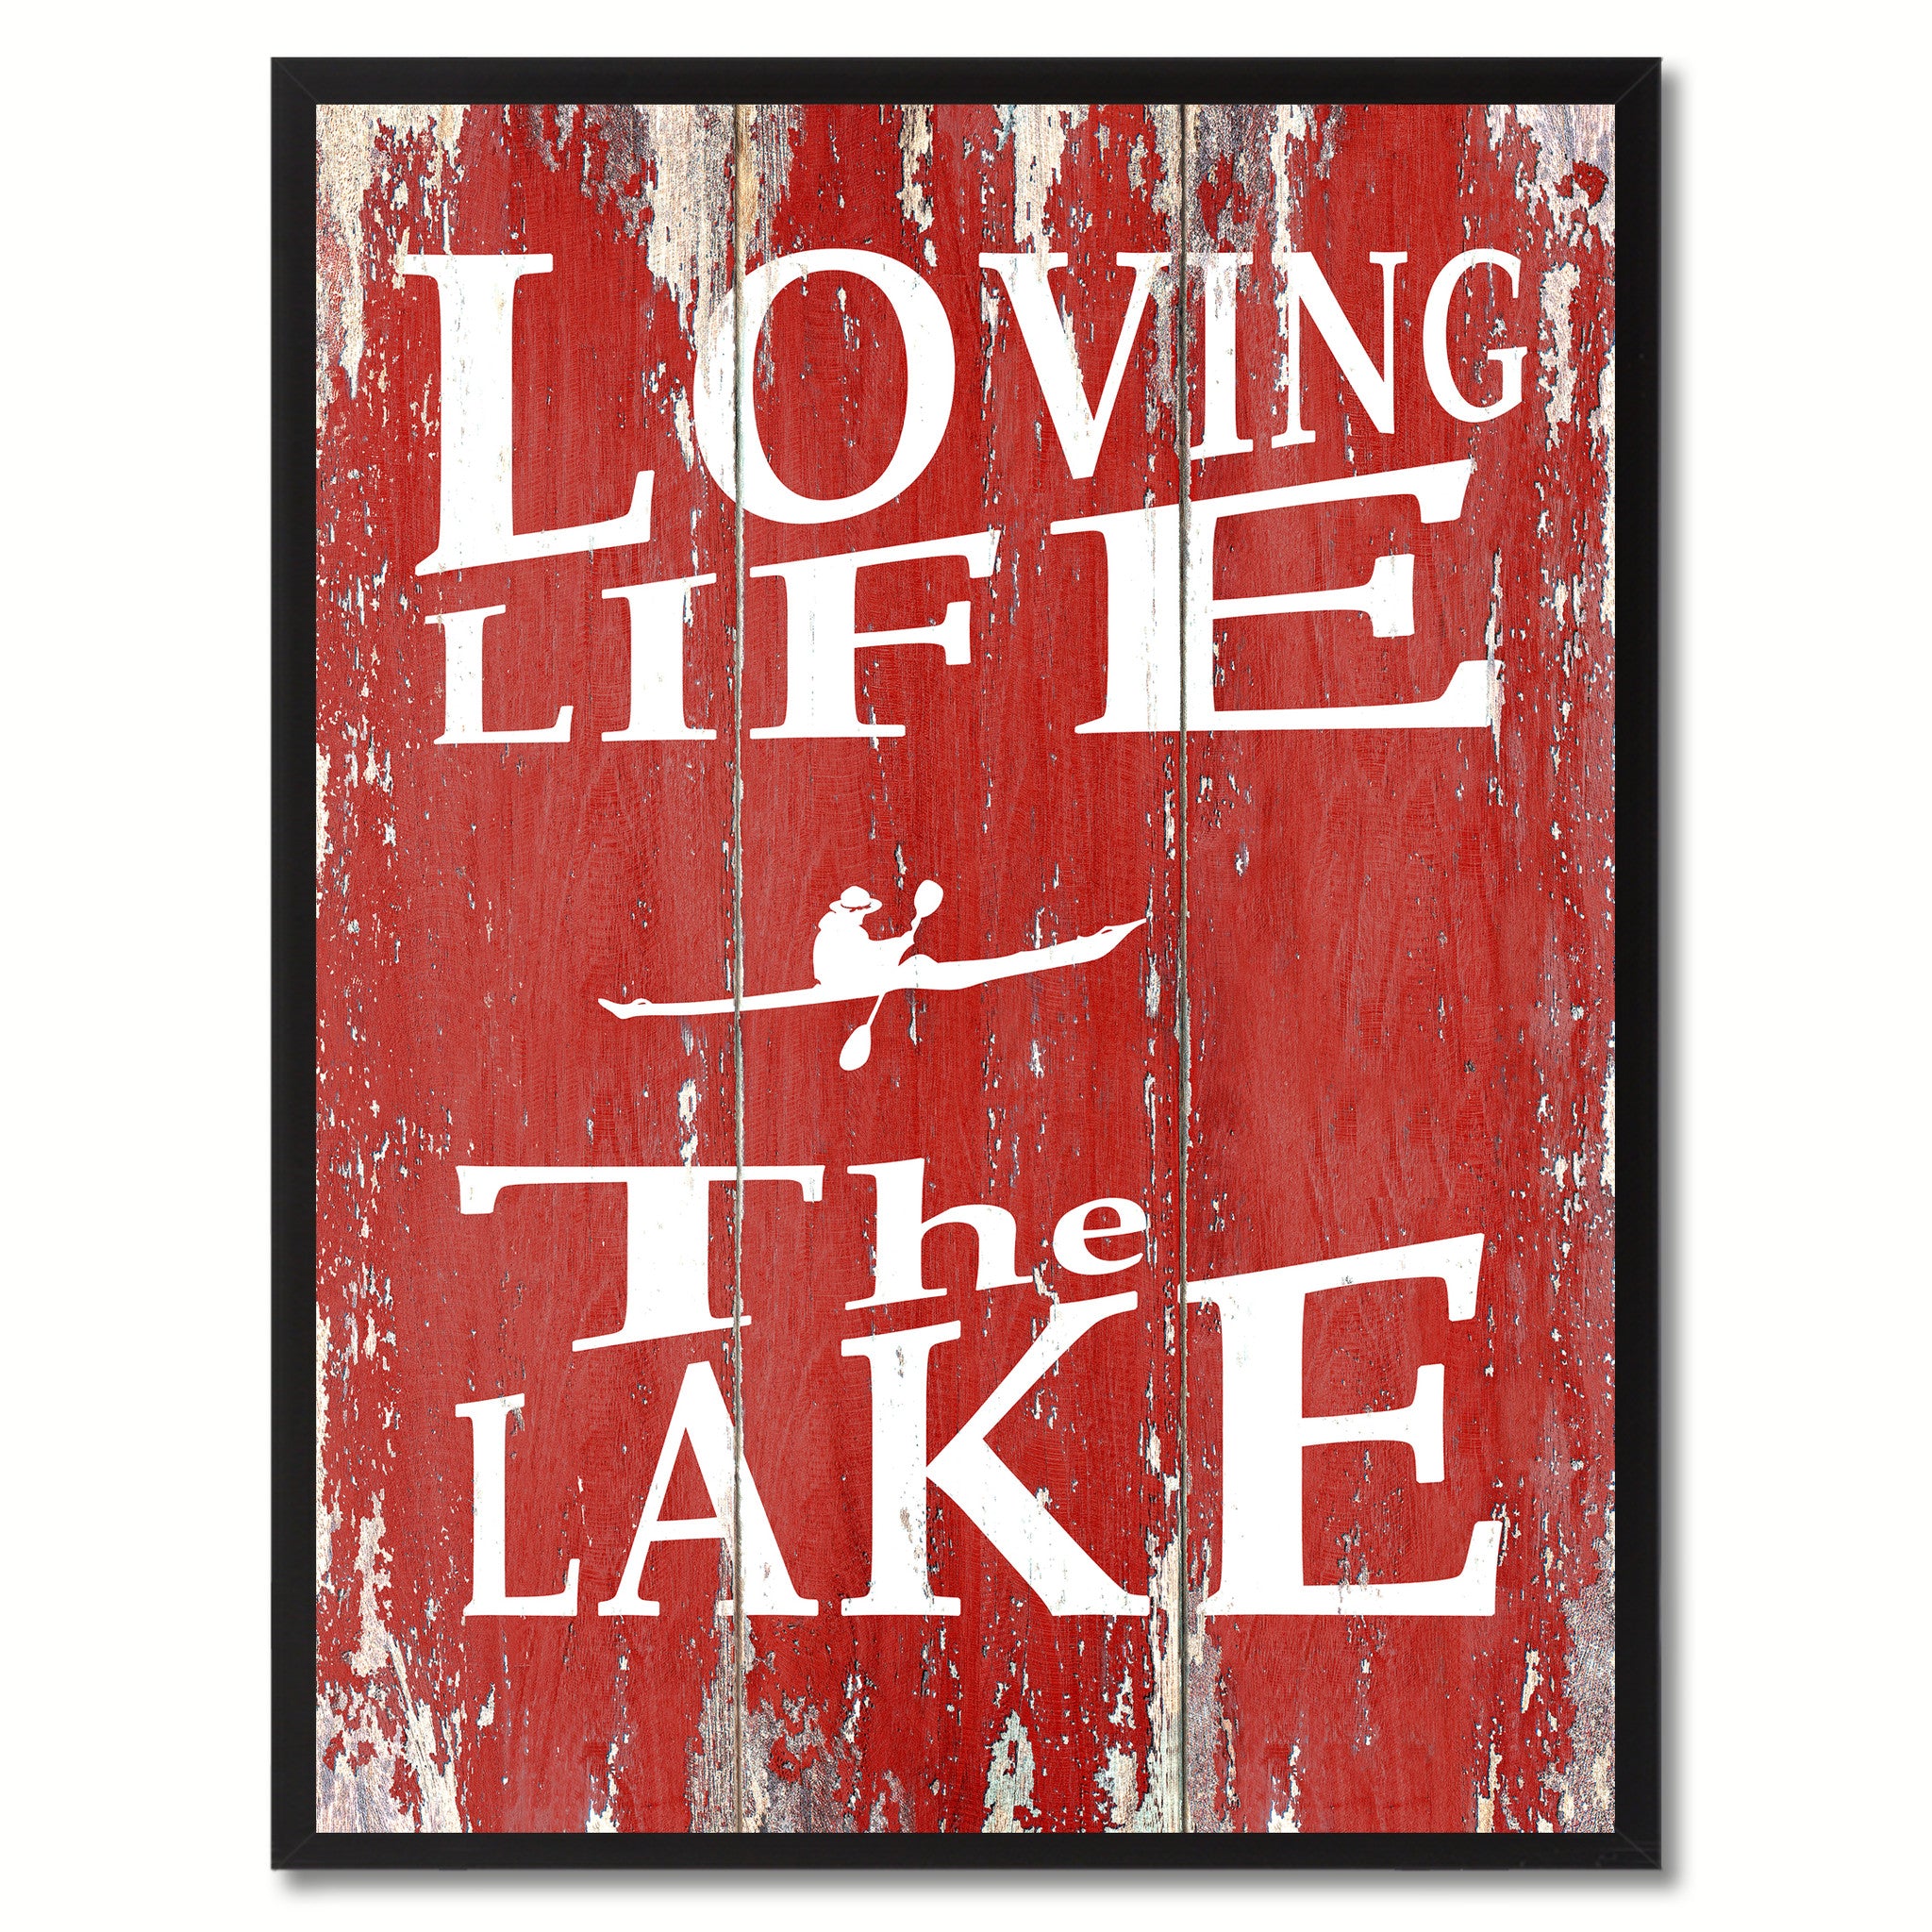 Loving Life The Lake Saying Canvas Print, Black Picture Frame Home Decor Wall Art Gifts